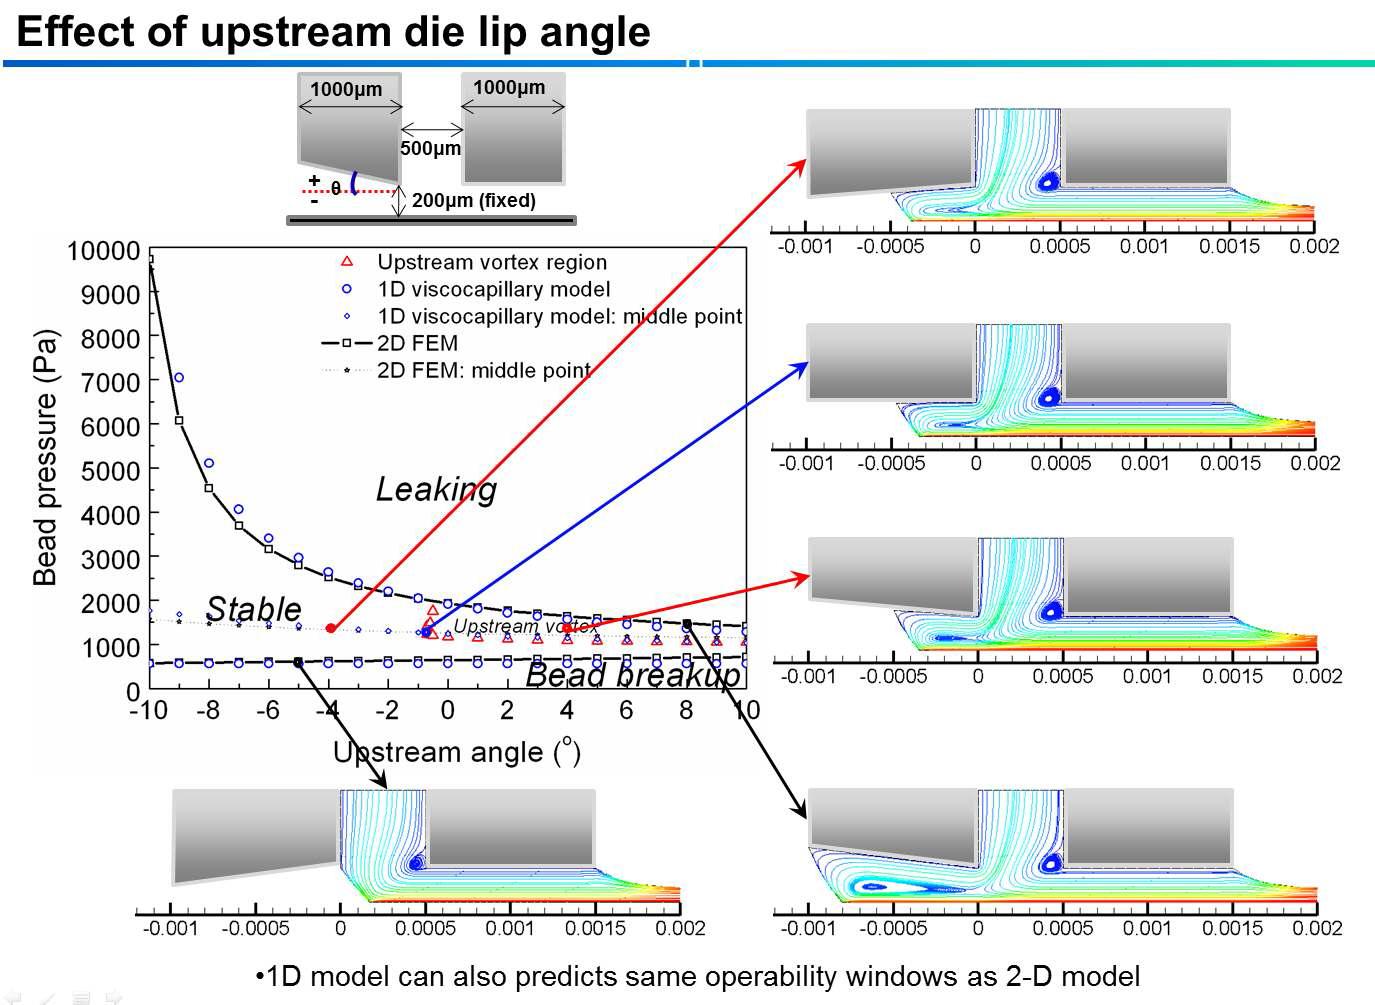 Effect of upstream die angle on the operability window.